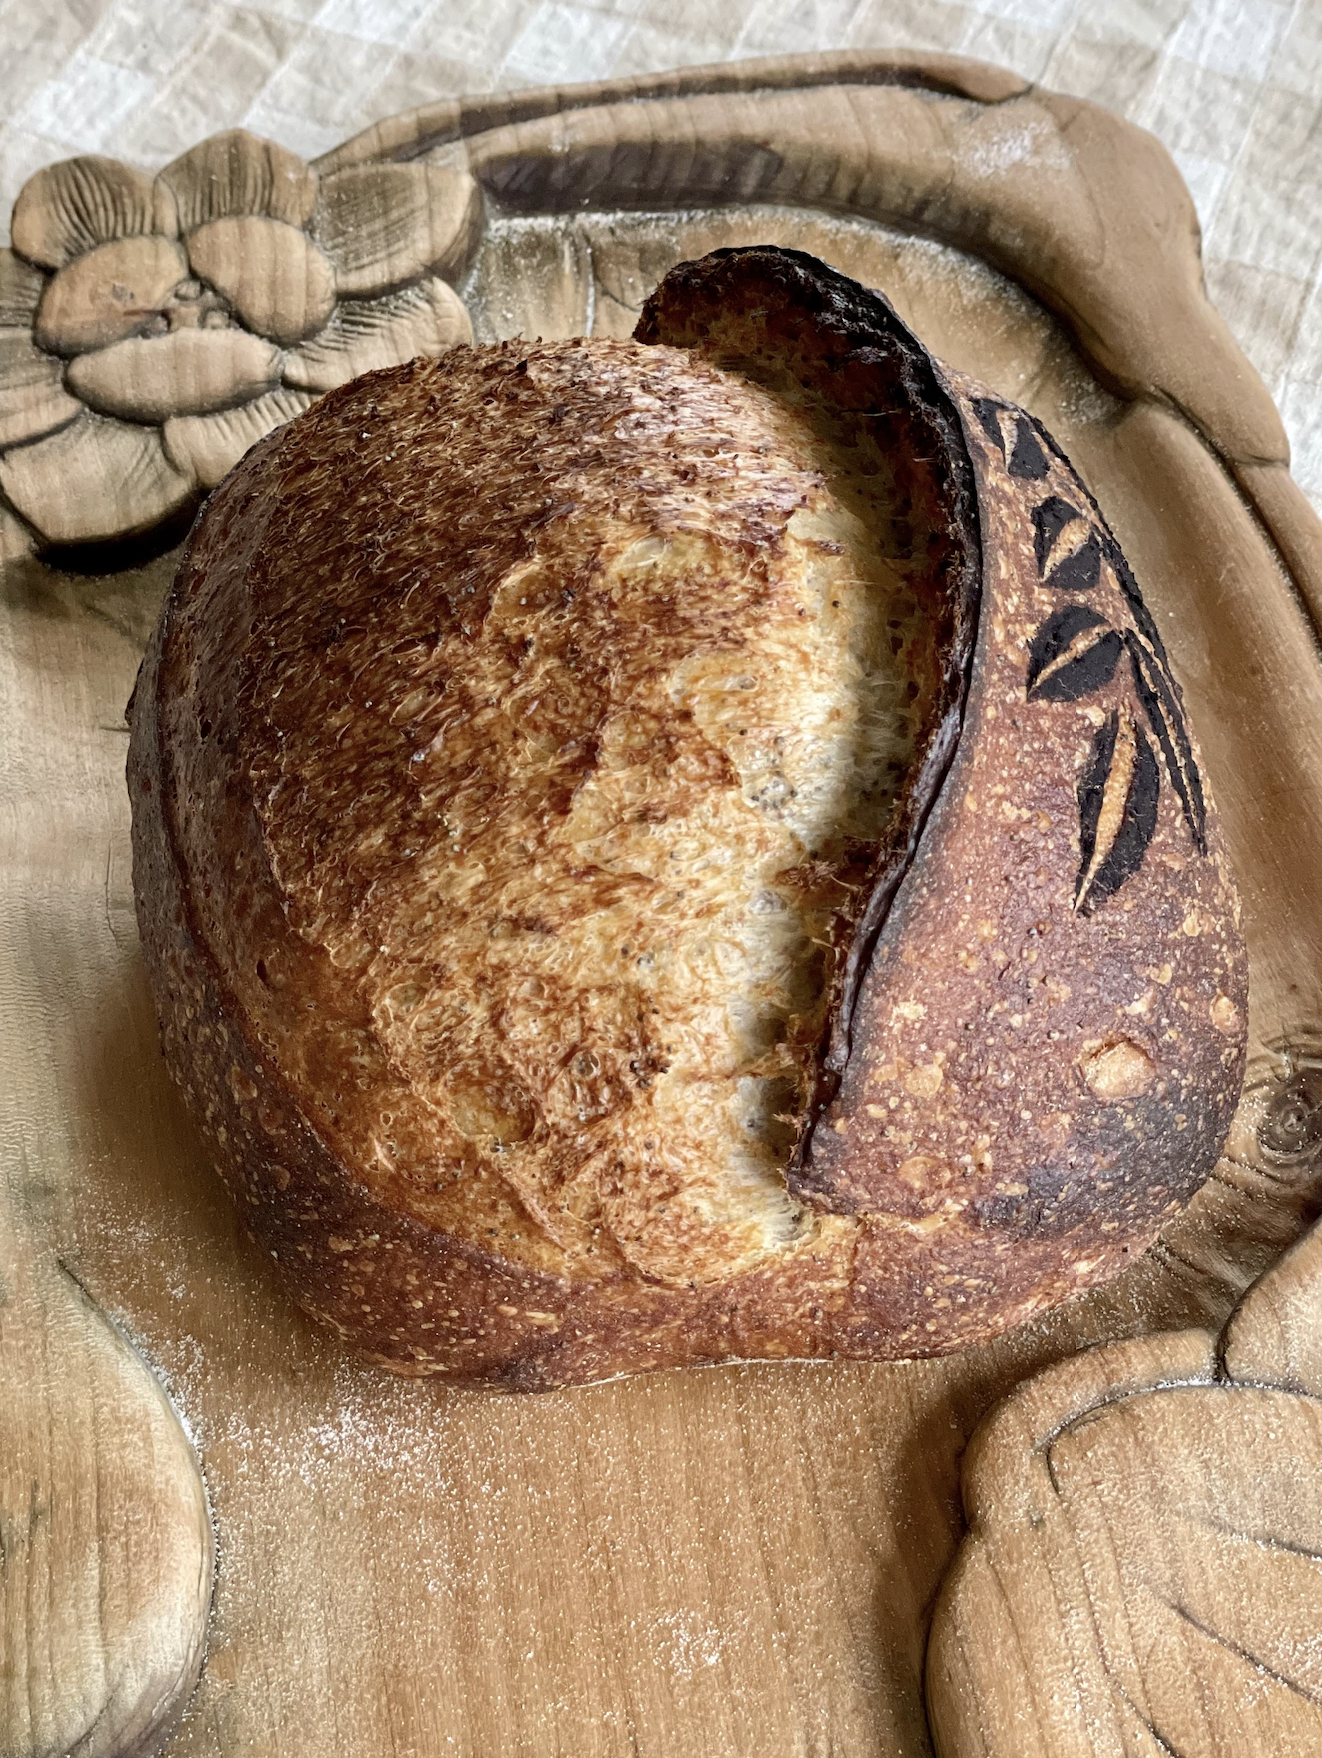 sourdough bread influencer home baker classes teaching recipes trouble shooting help support in England United Kingdom from Marie Lester of @MarieLesterBaker on Instagram 29